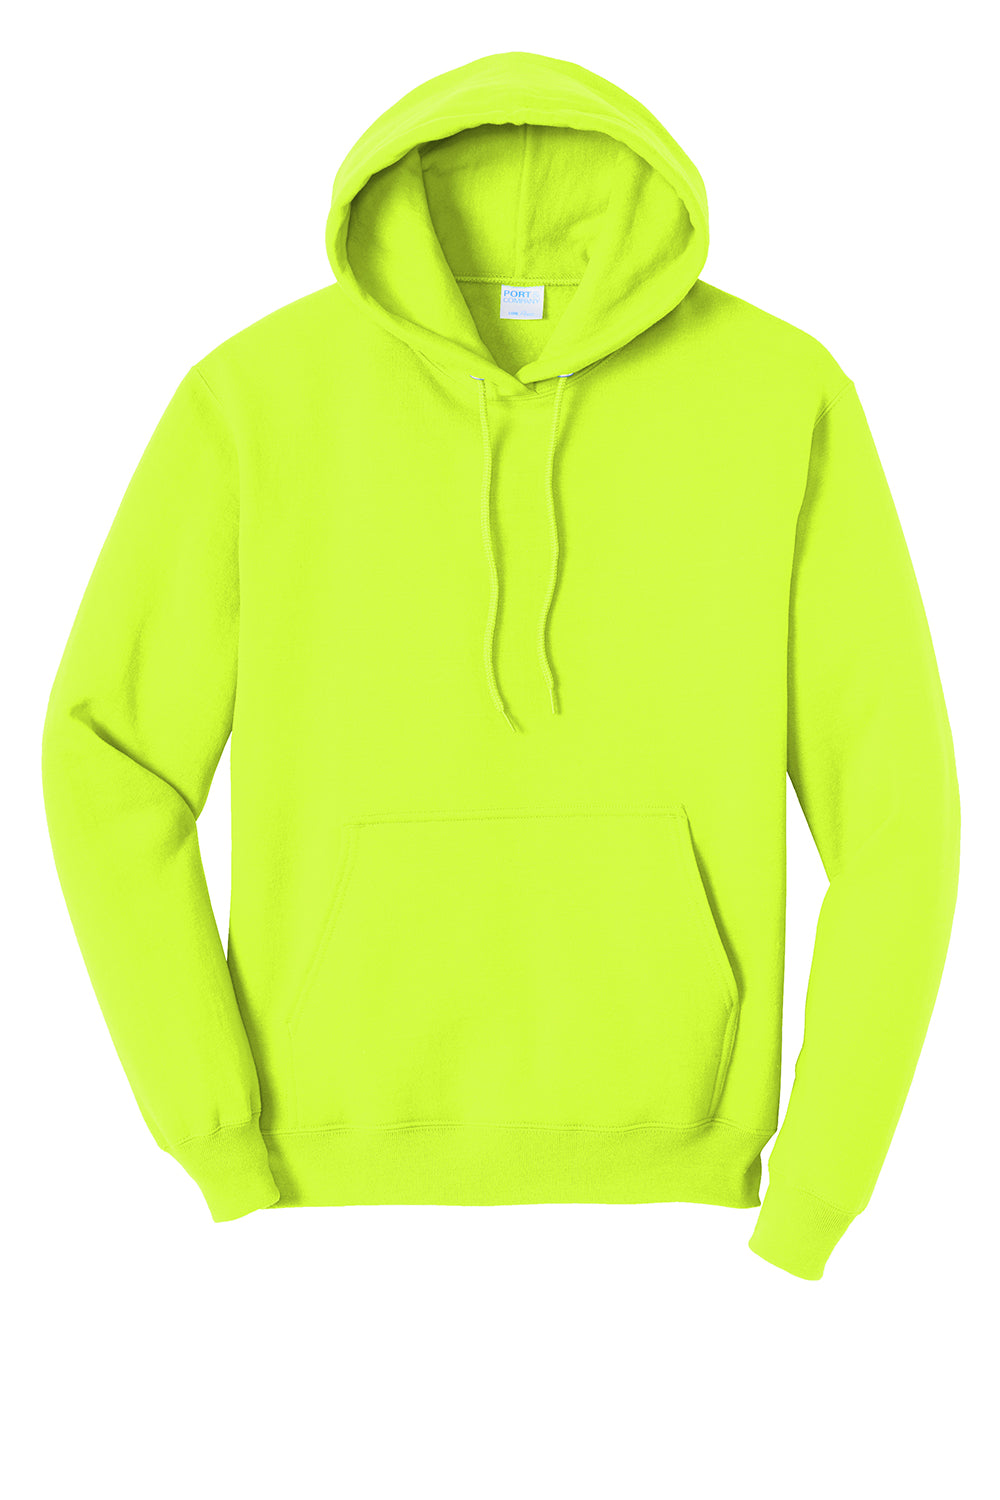 Port & Company PC78H/PC78HT Mens Core Fleece Hooded Sweatshirt Hoodie Safety Green Flat Front